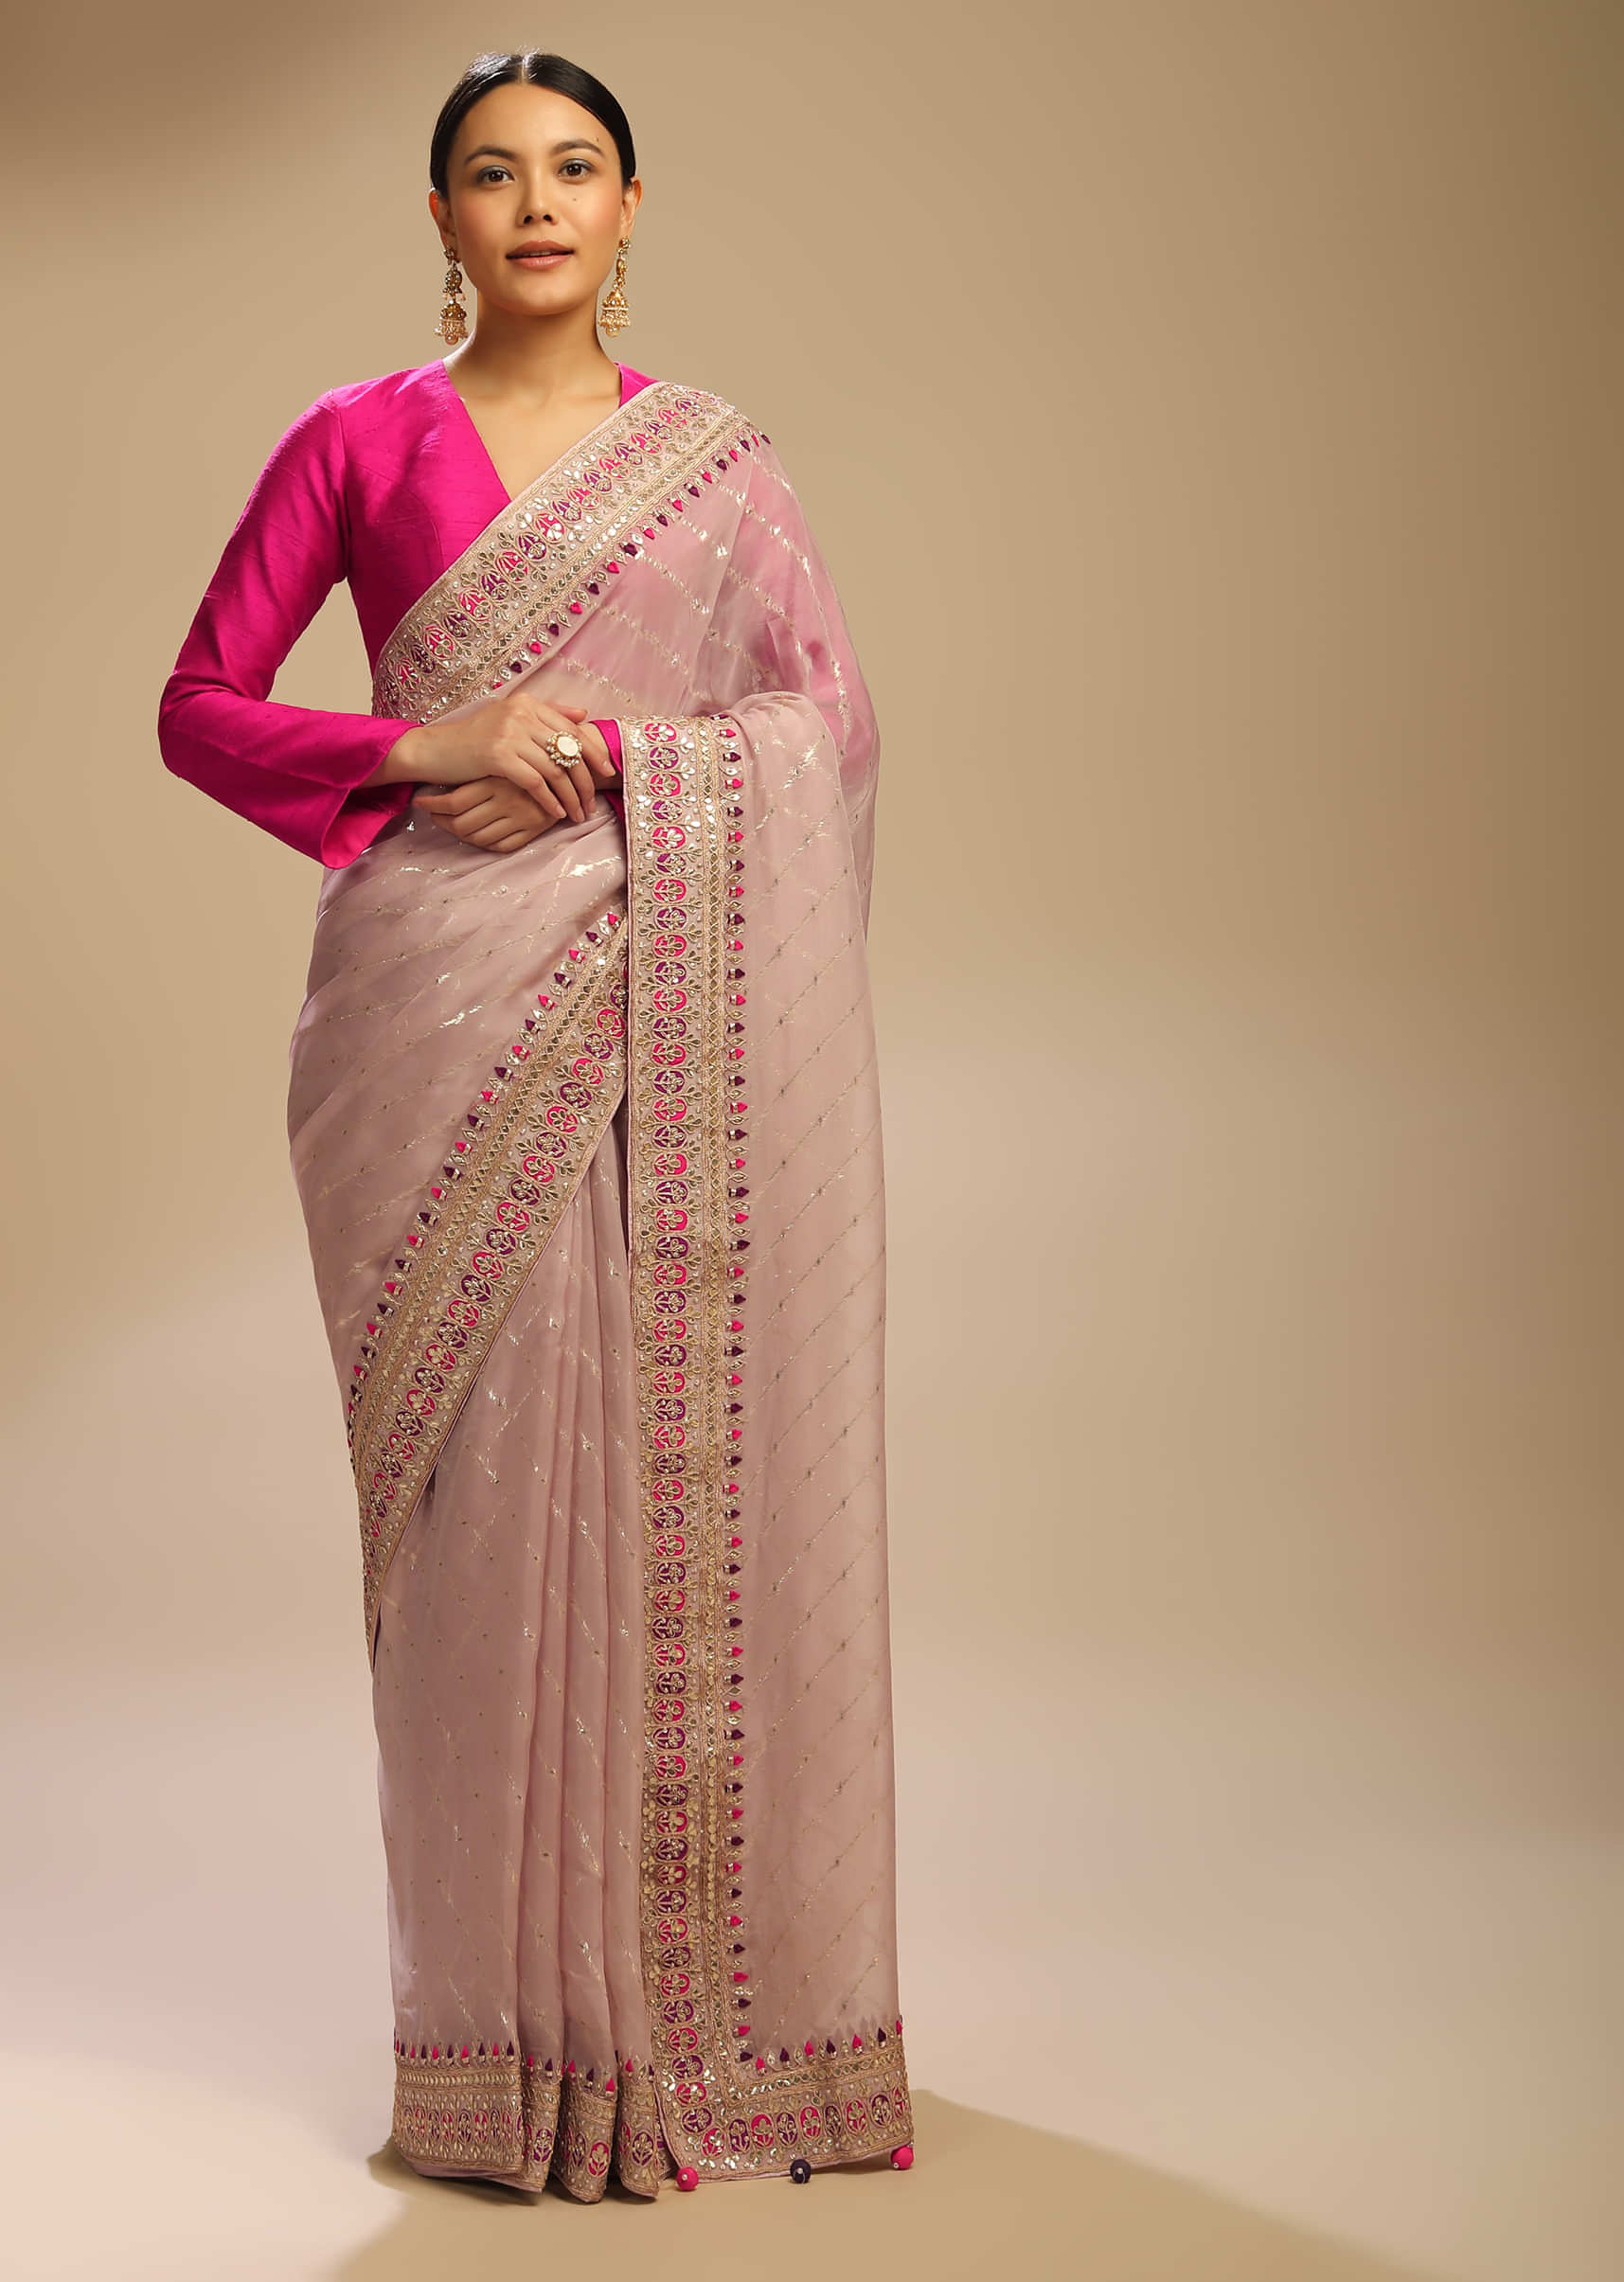 Violet Ice Saree With Lurex Stripes, Fuchsia And Purple Patchwork And Gotta Patti On The Border